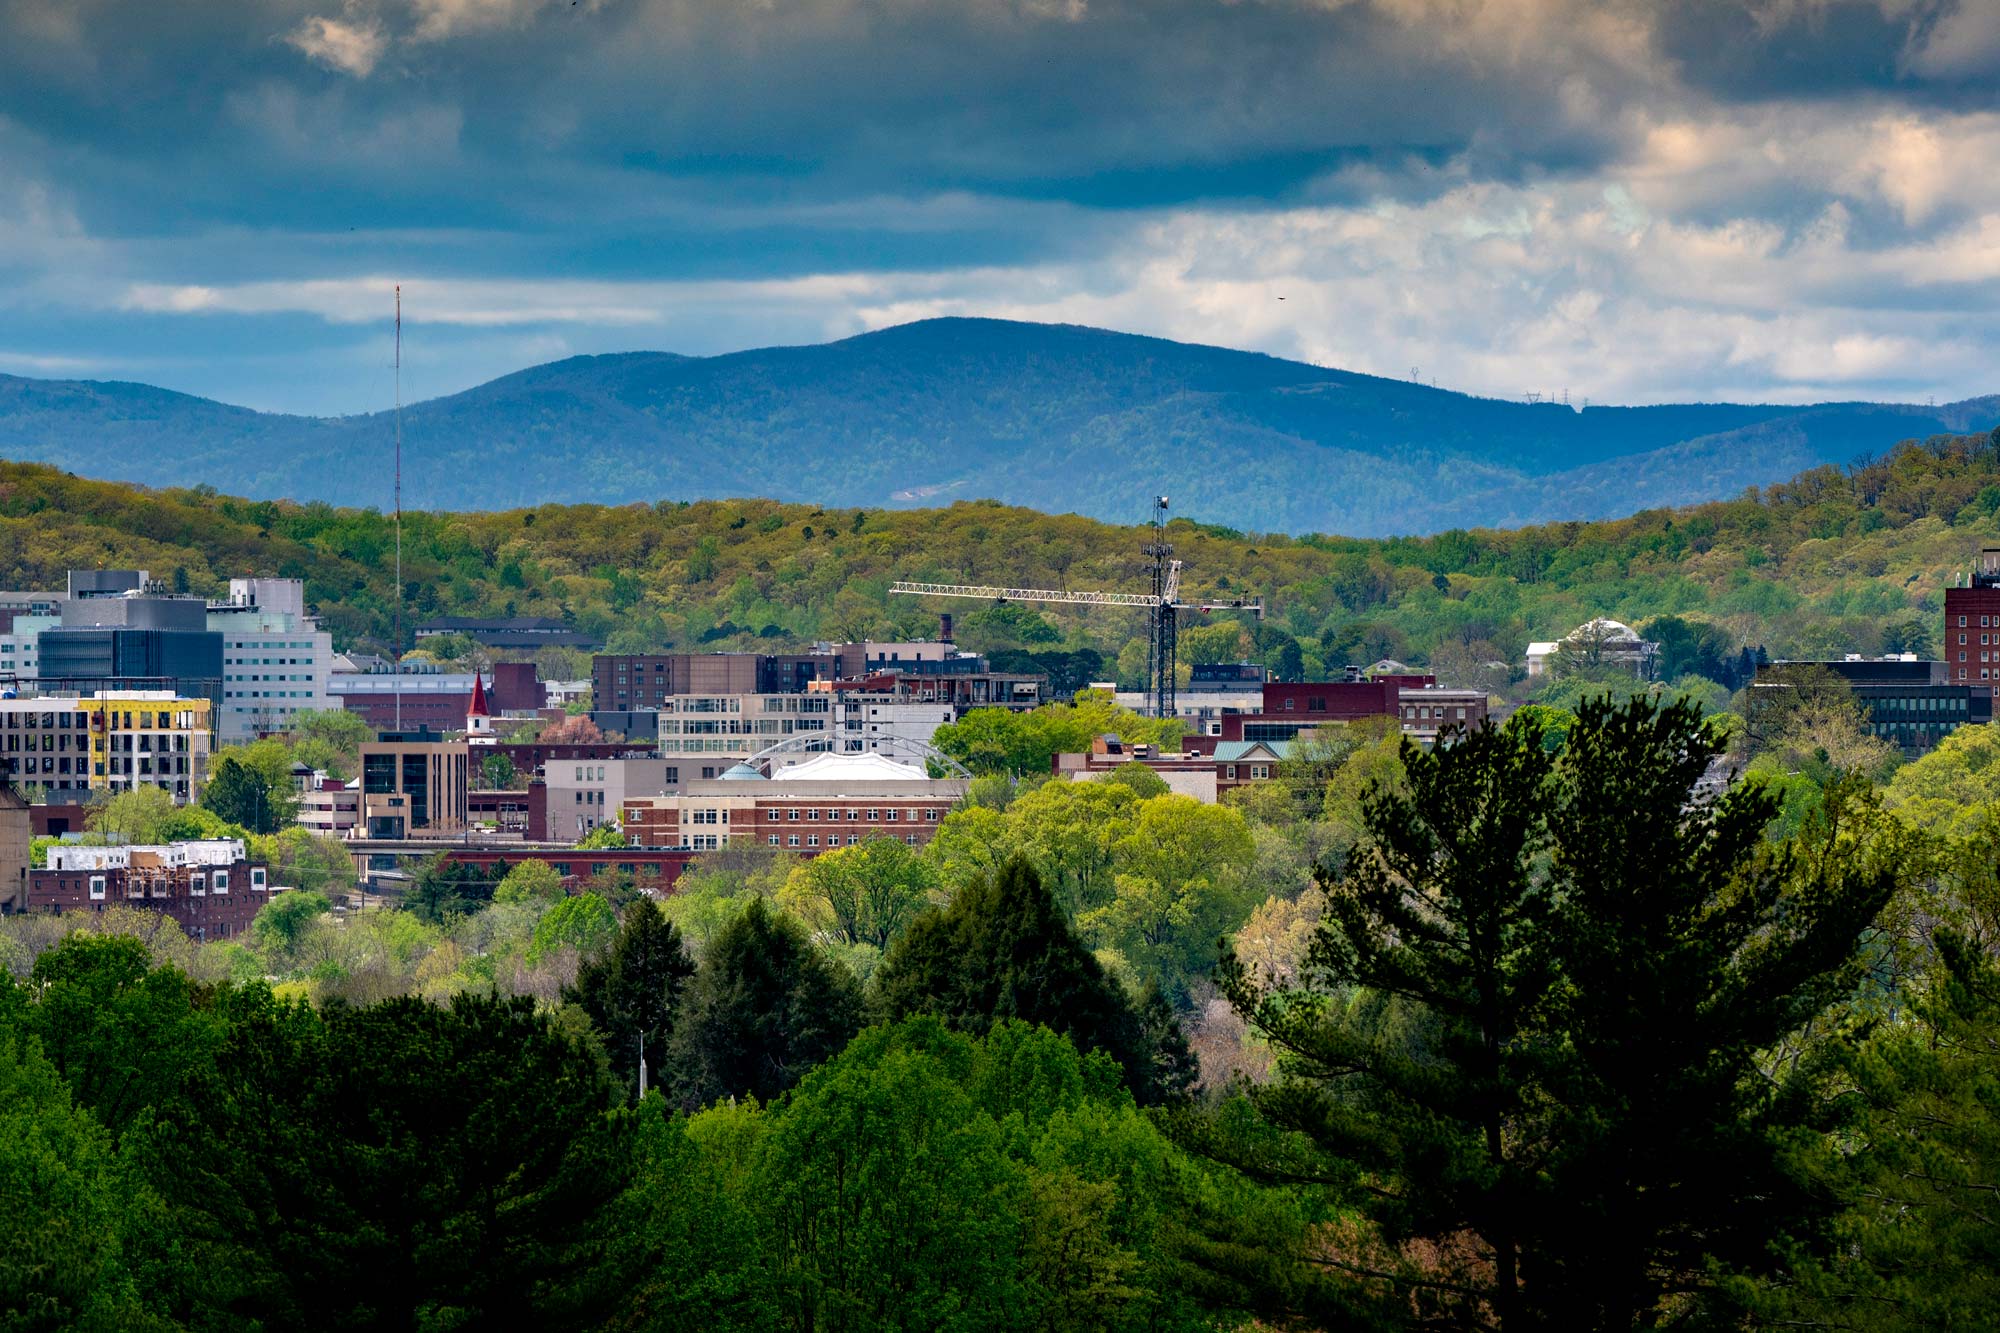 Digital drawing of Charlottesville from a distance